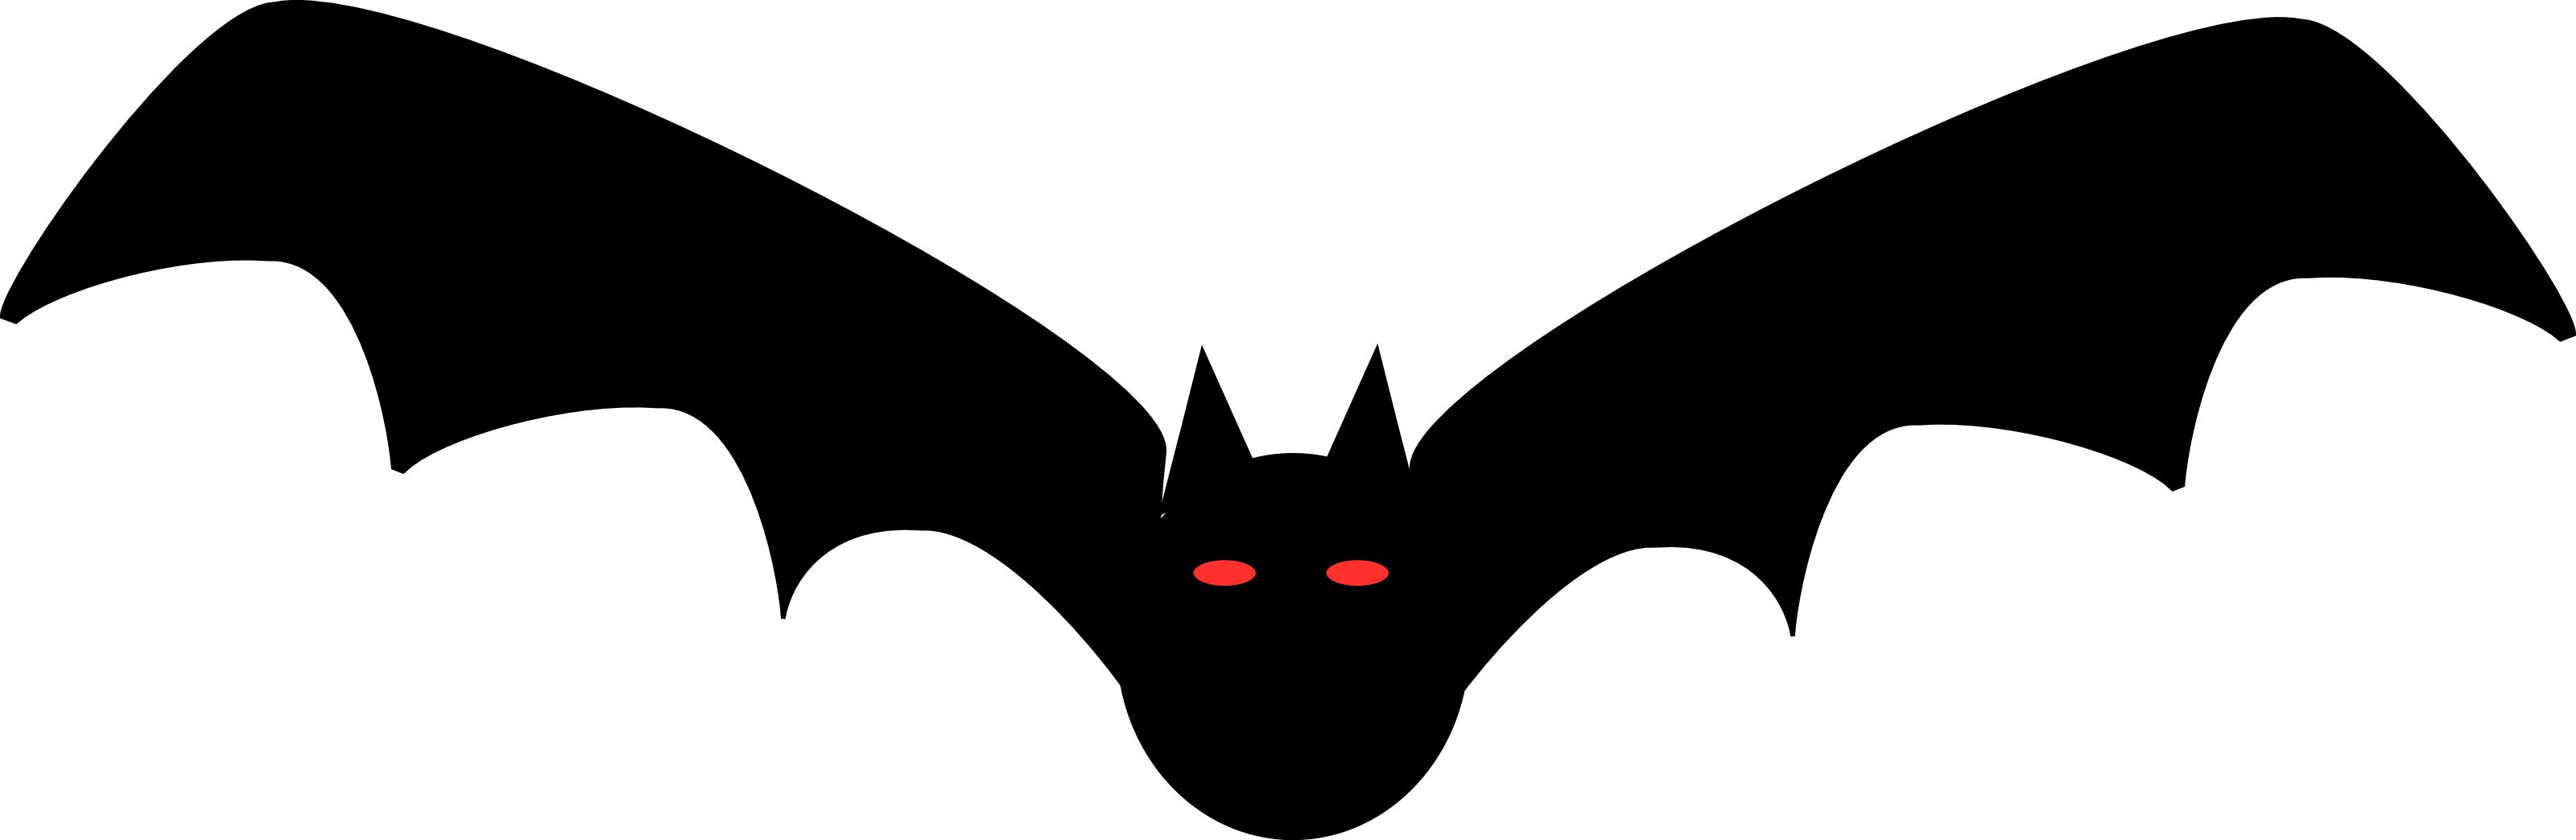 Free Halloween Clipart Illustration Of Black Bat With Red